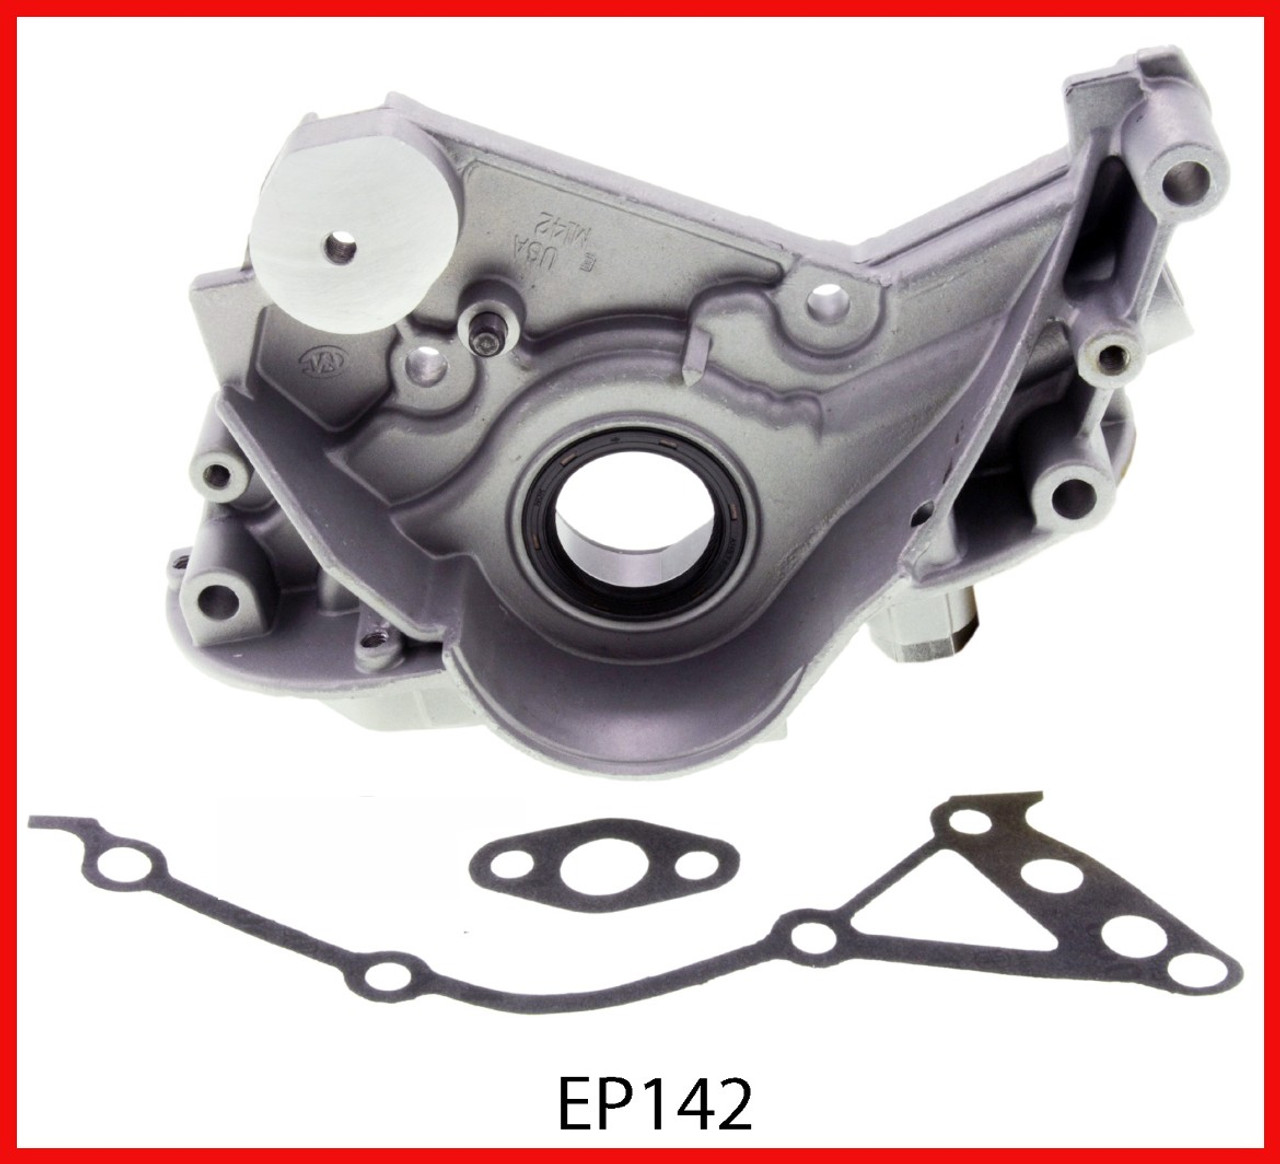 1987 Plymouth Grand Voyager 3.0L Engine Oil Pump EP142 -4